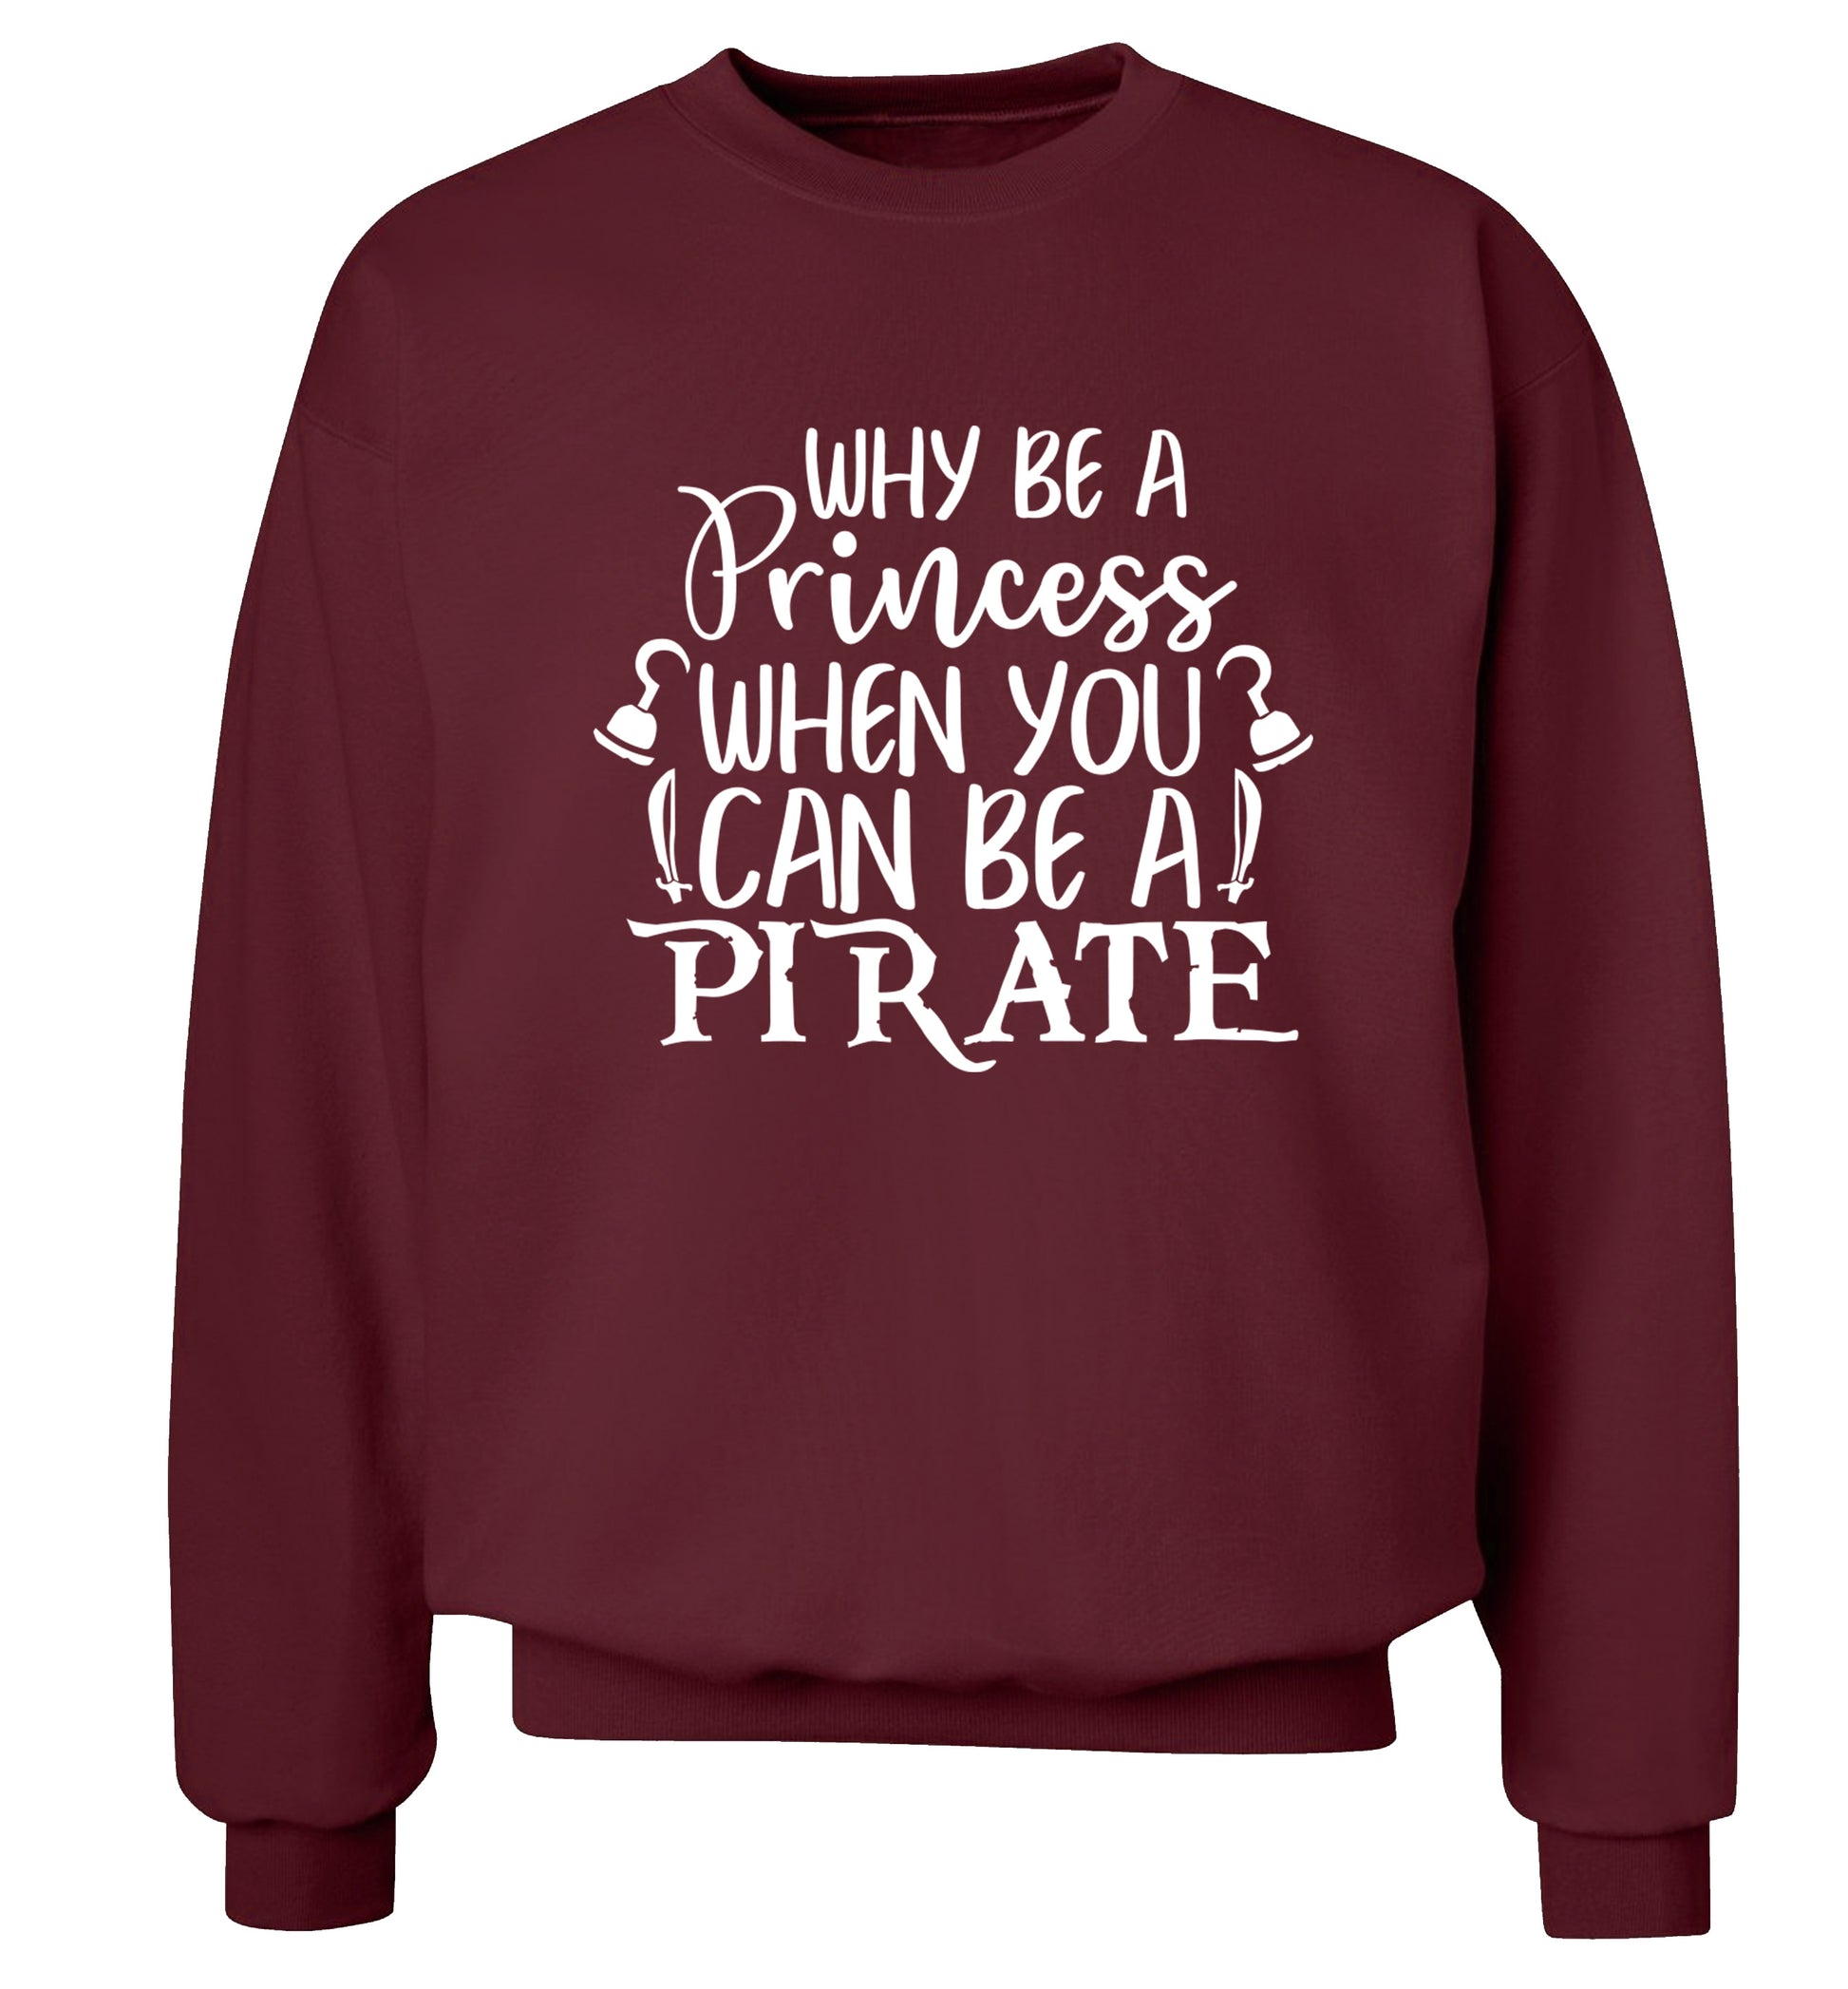 Why be a princess when you can be a pirate? Adult's unisex maroon Sweater 2XL